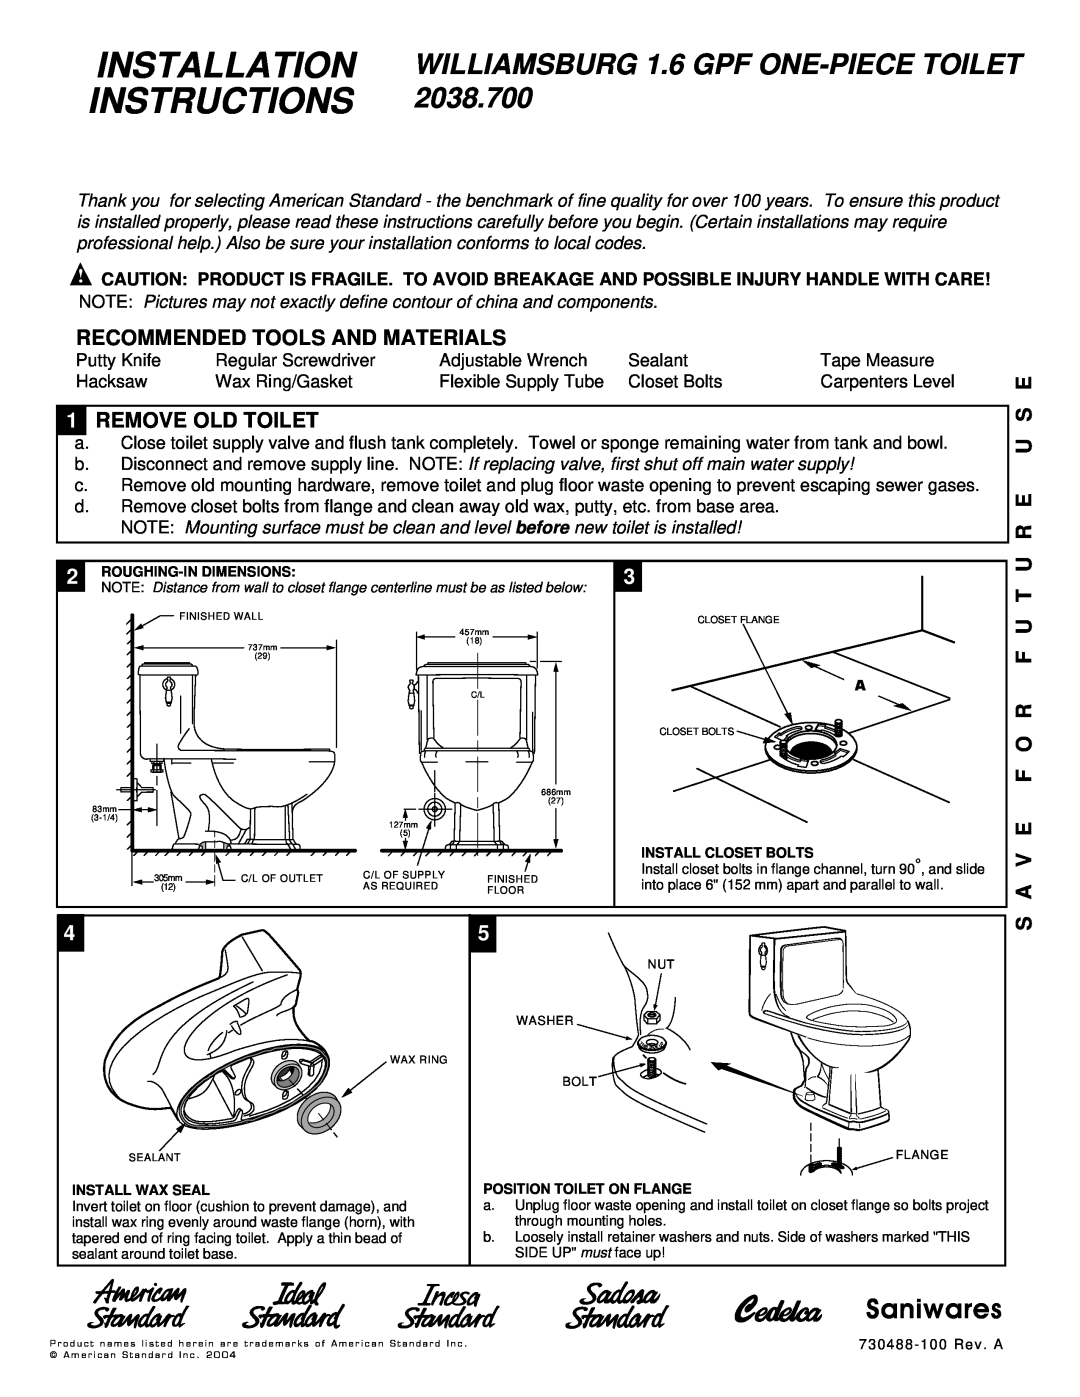 American Standard 2038.700 installation instructions Recommended Tools And Materials, 1REMOVE OLD TOILET, U R E U S E 